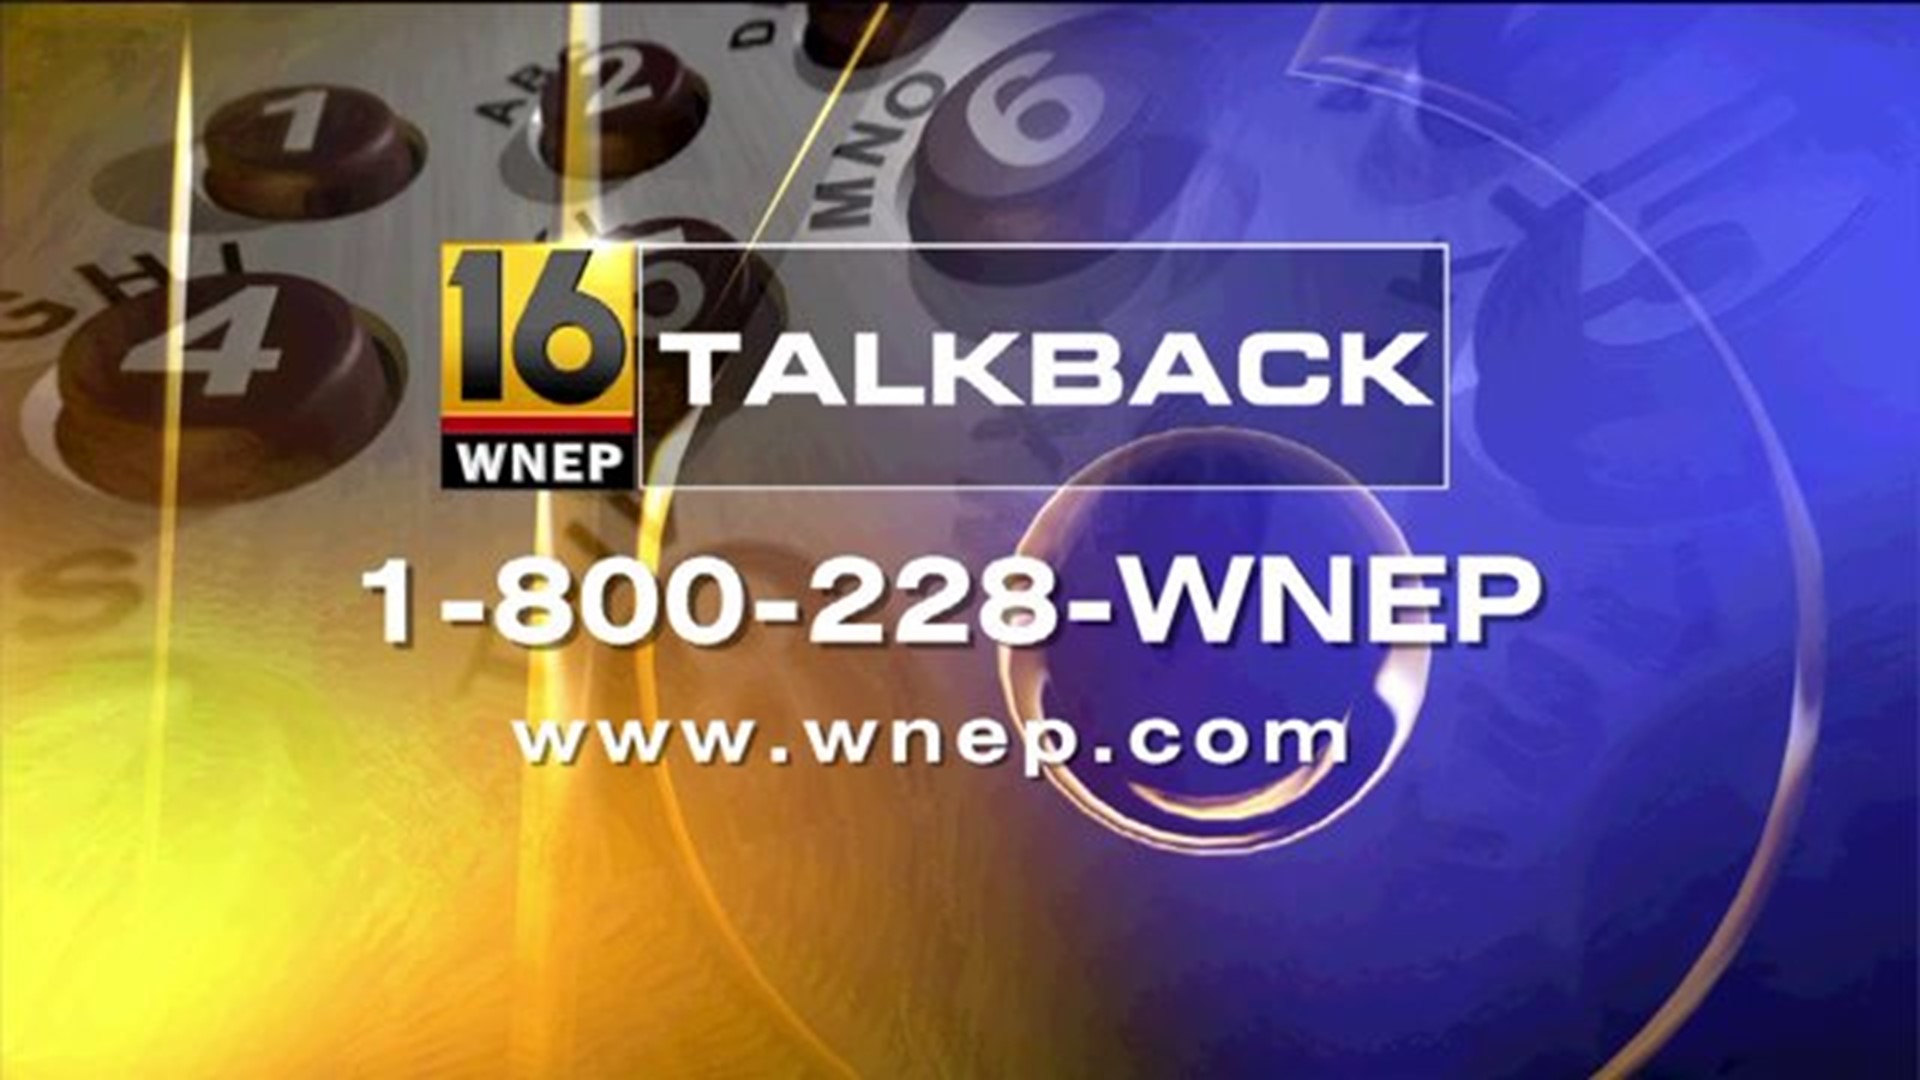 Talkback 16: Mixed Views on 10-Year-Old Boy Accused of Murder